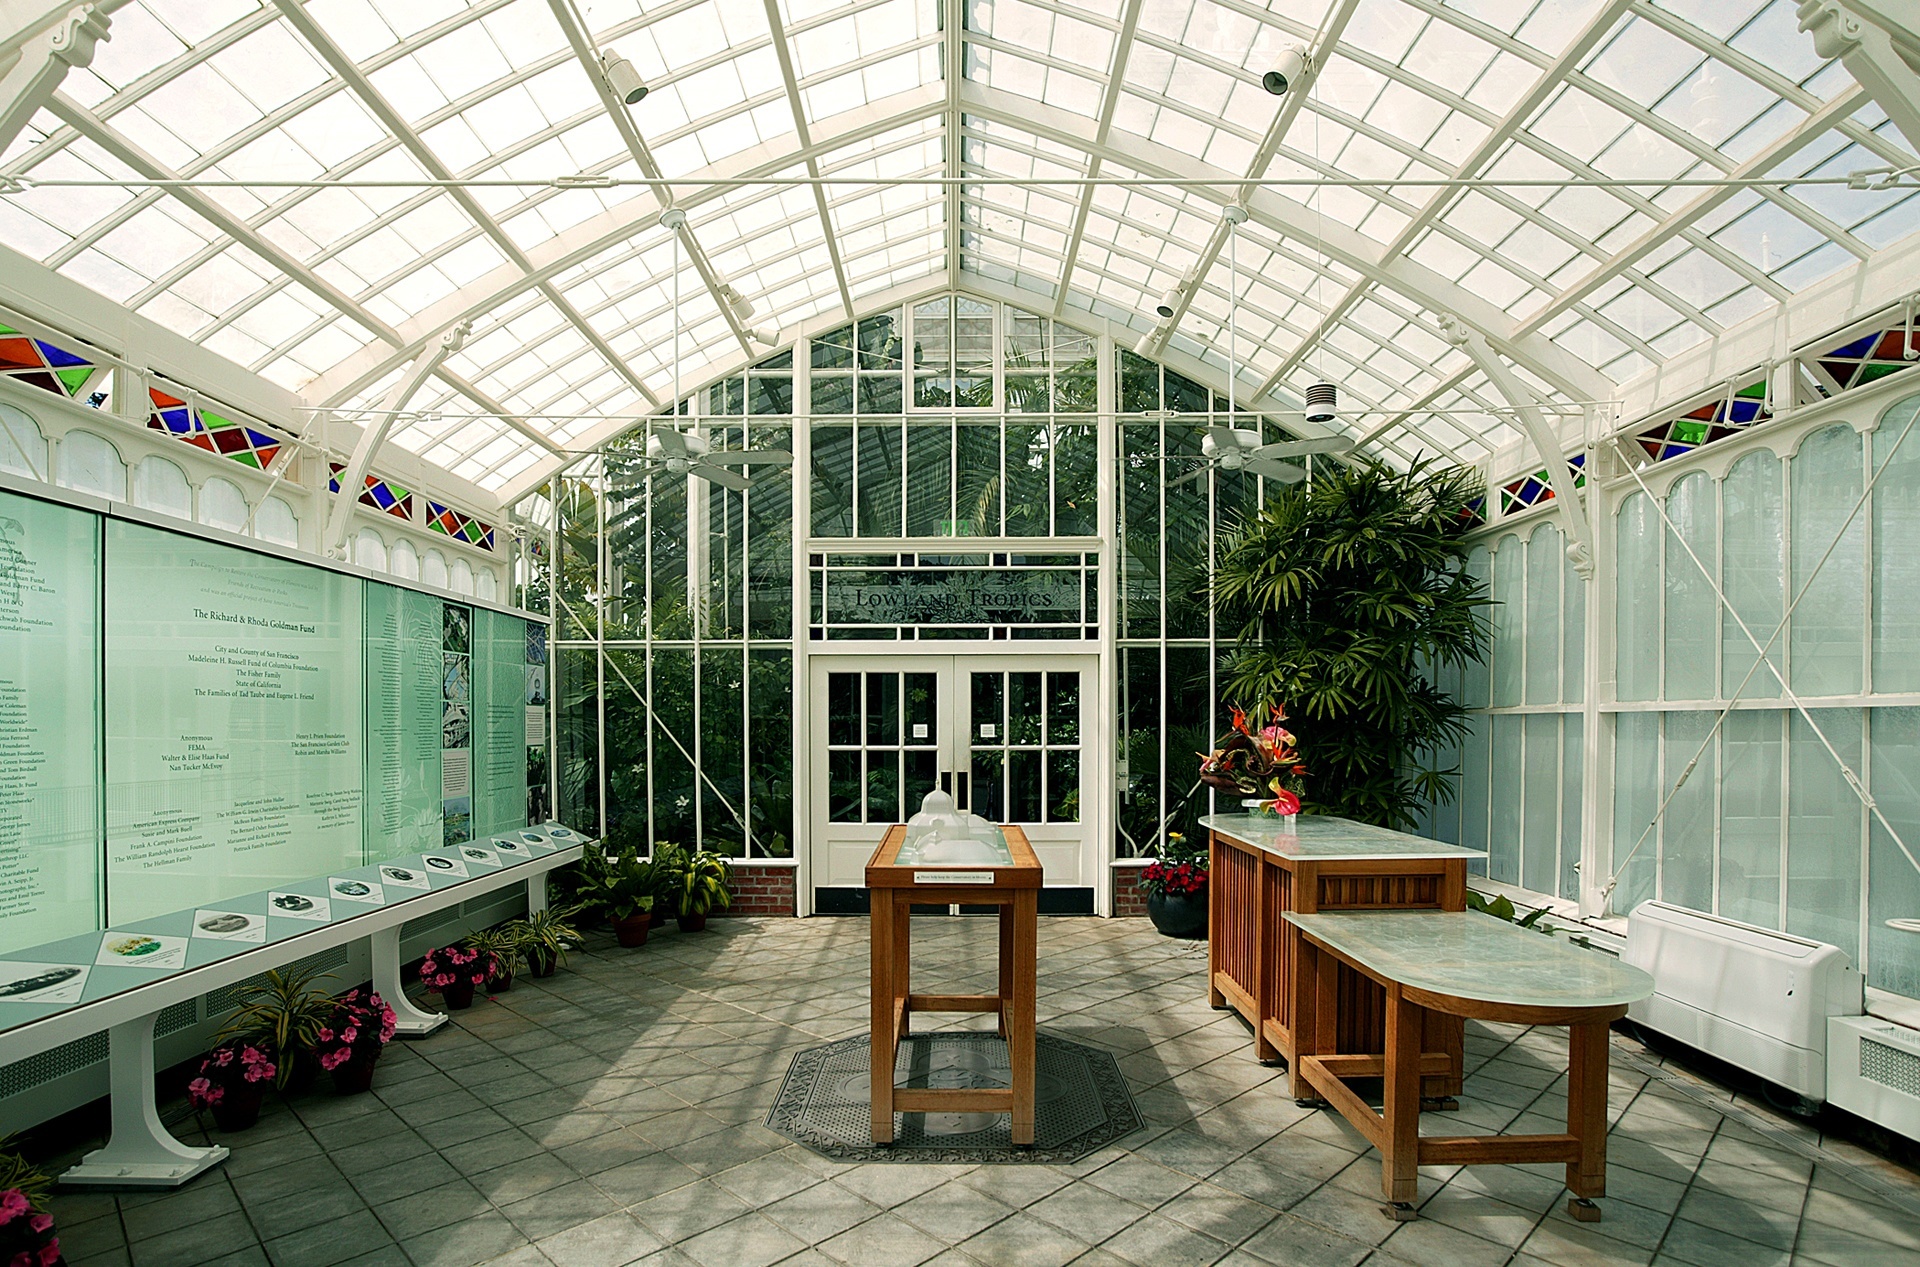 Conservatory of Flowers Architectural Restoration and Rehabilitation - ARG